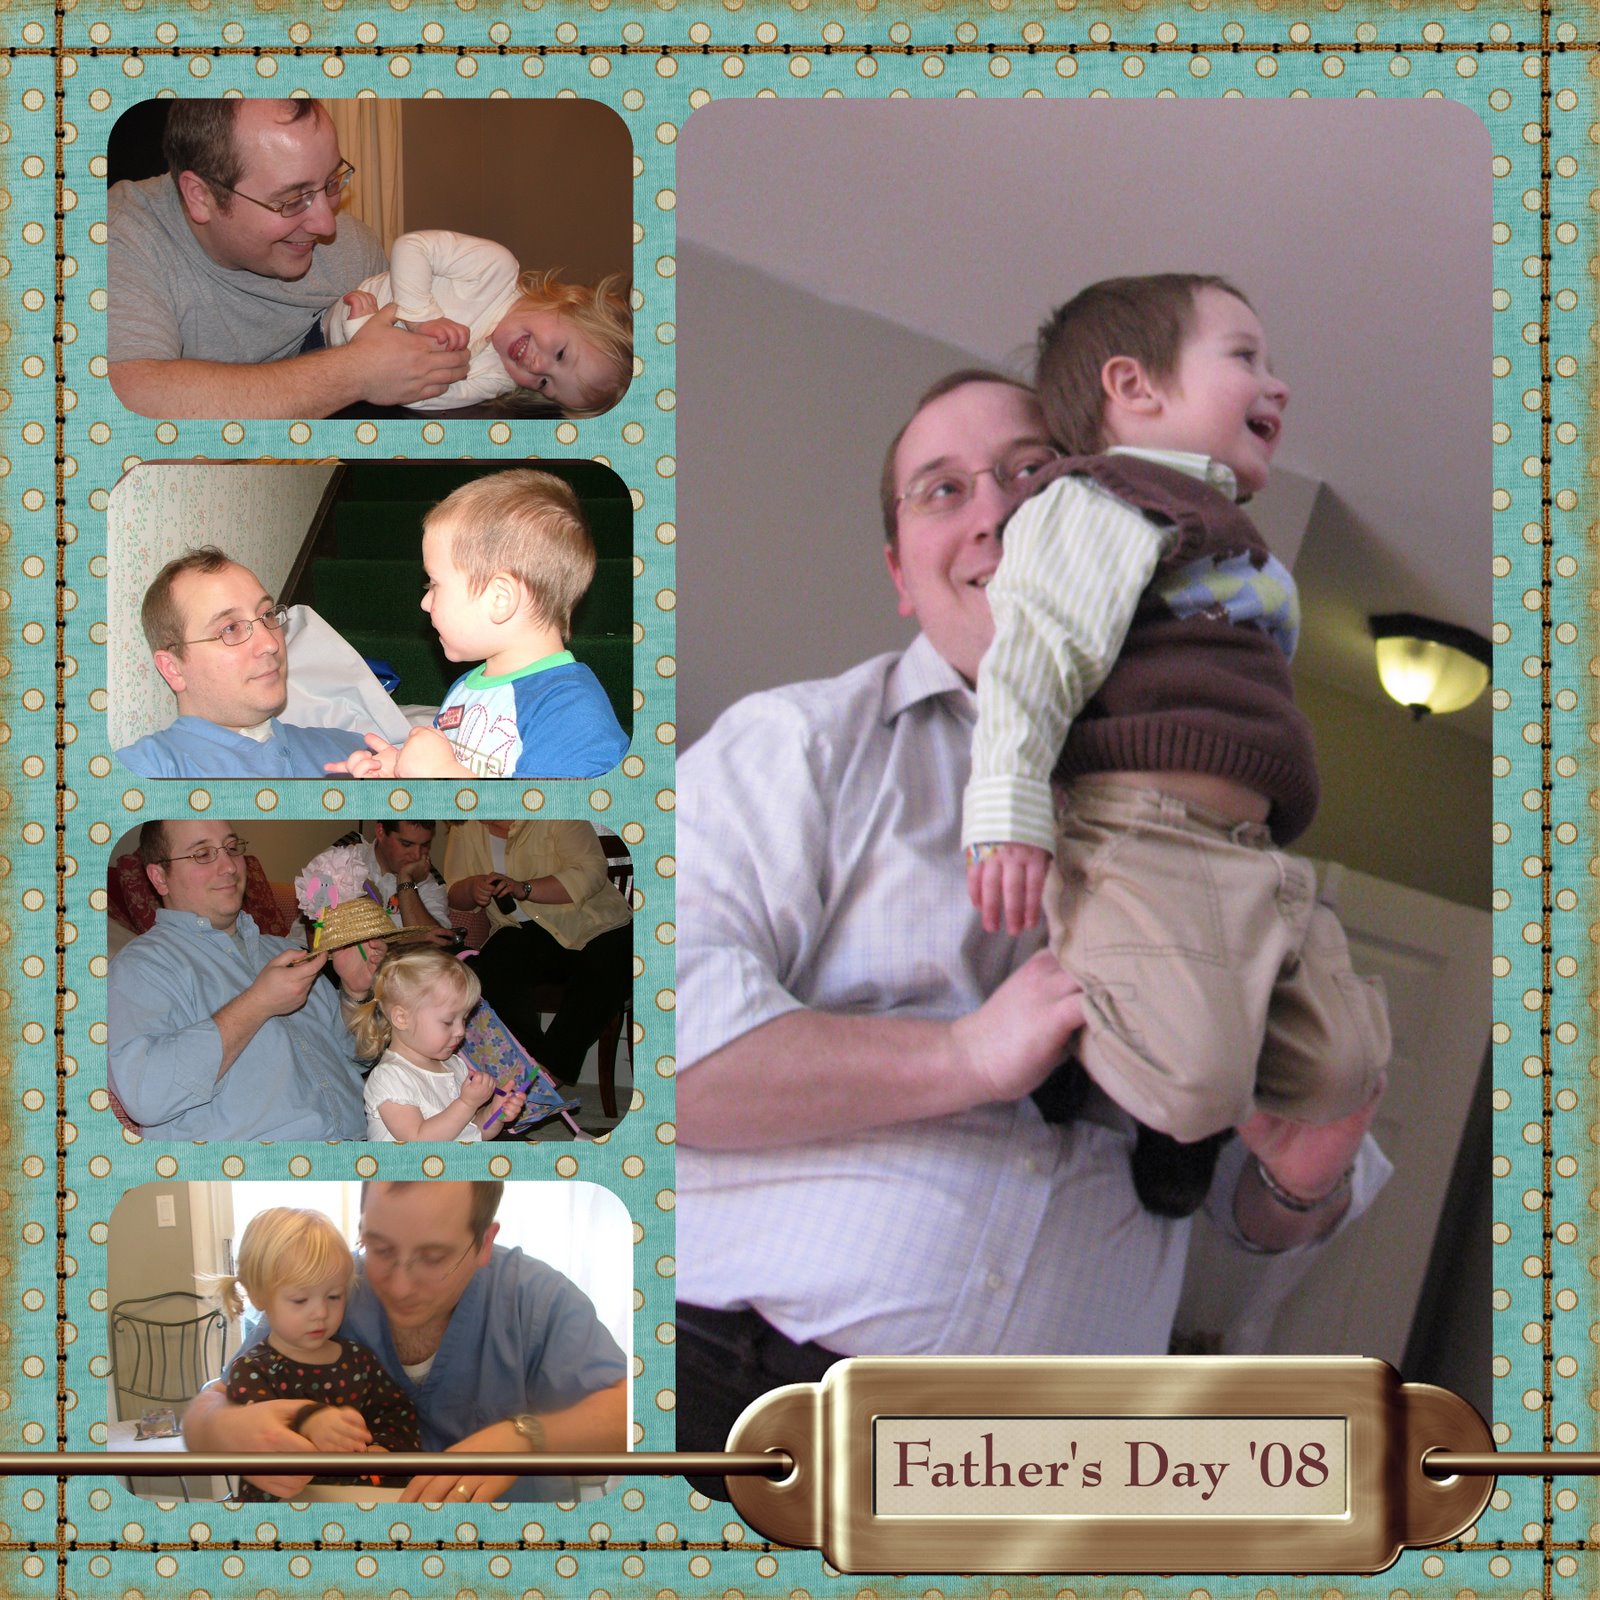 [fathers+day+08.jpg]